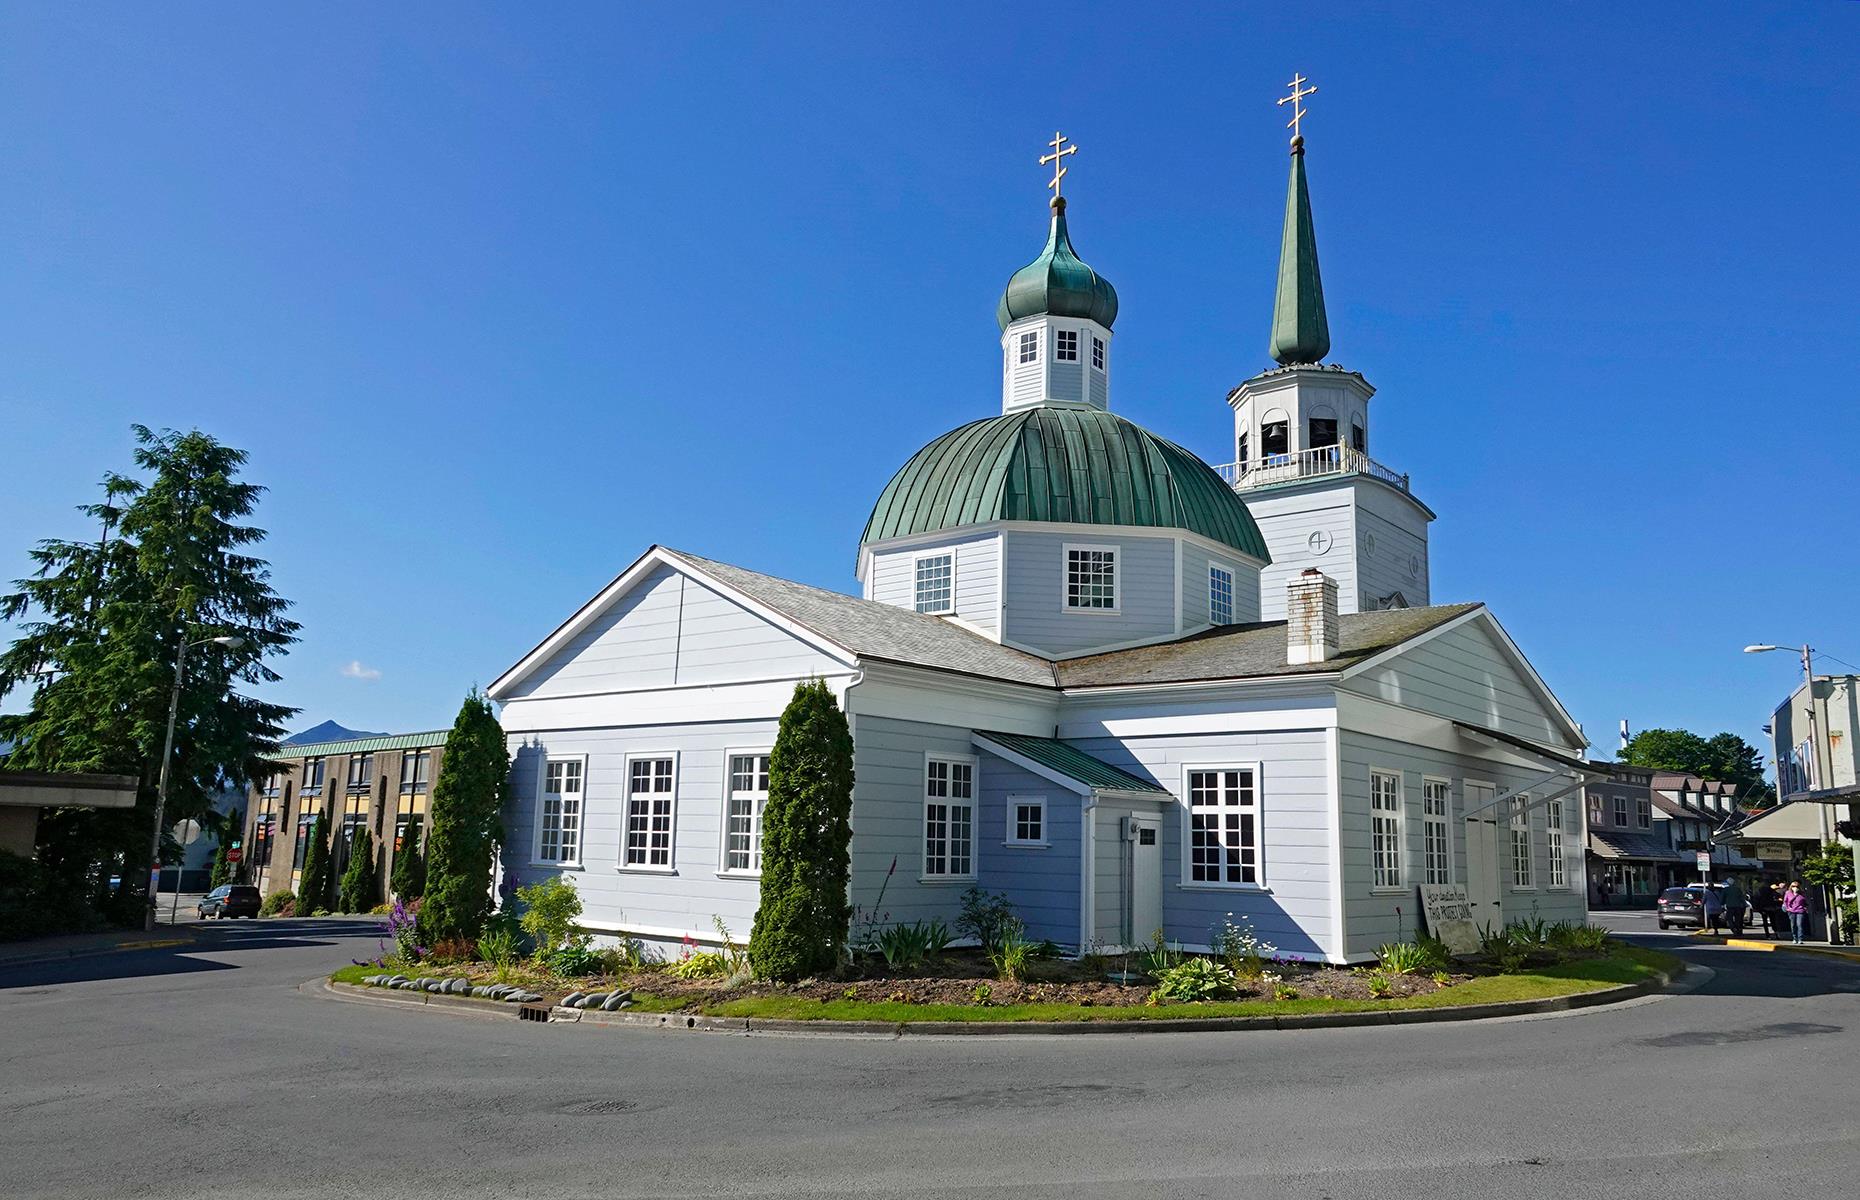 This is the oldest Russian Orthodox cathedral in North America. Built in 1848 by Russian settlers, the cathedral is known for its green onion domes and an abundance of icons decorating the walls inside. It's open to visitors and offers tours that give an insight into the history and culture of the longstanding Russian Orthodox community in Alaska.